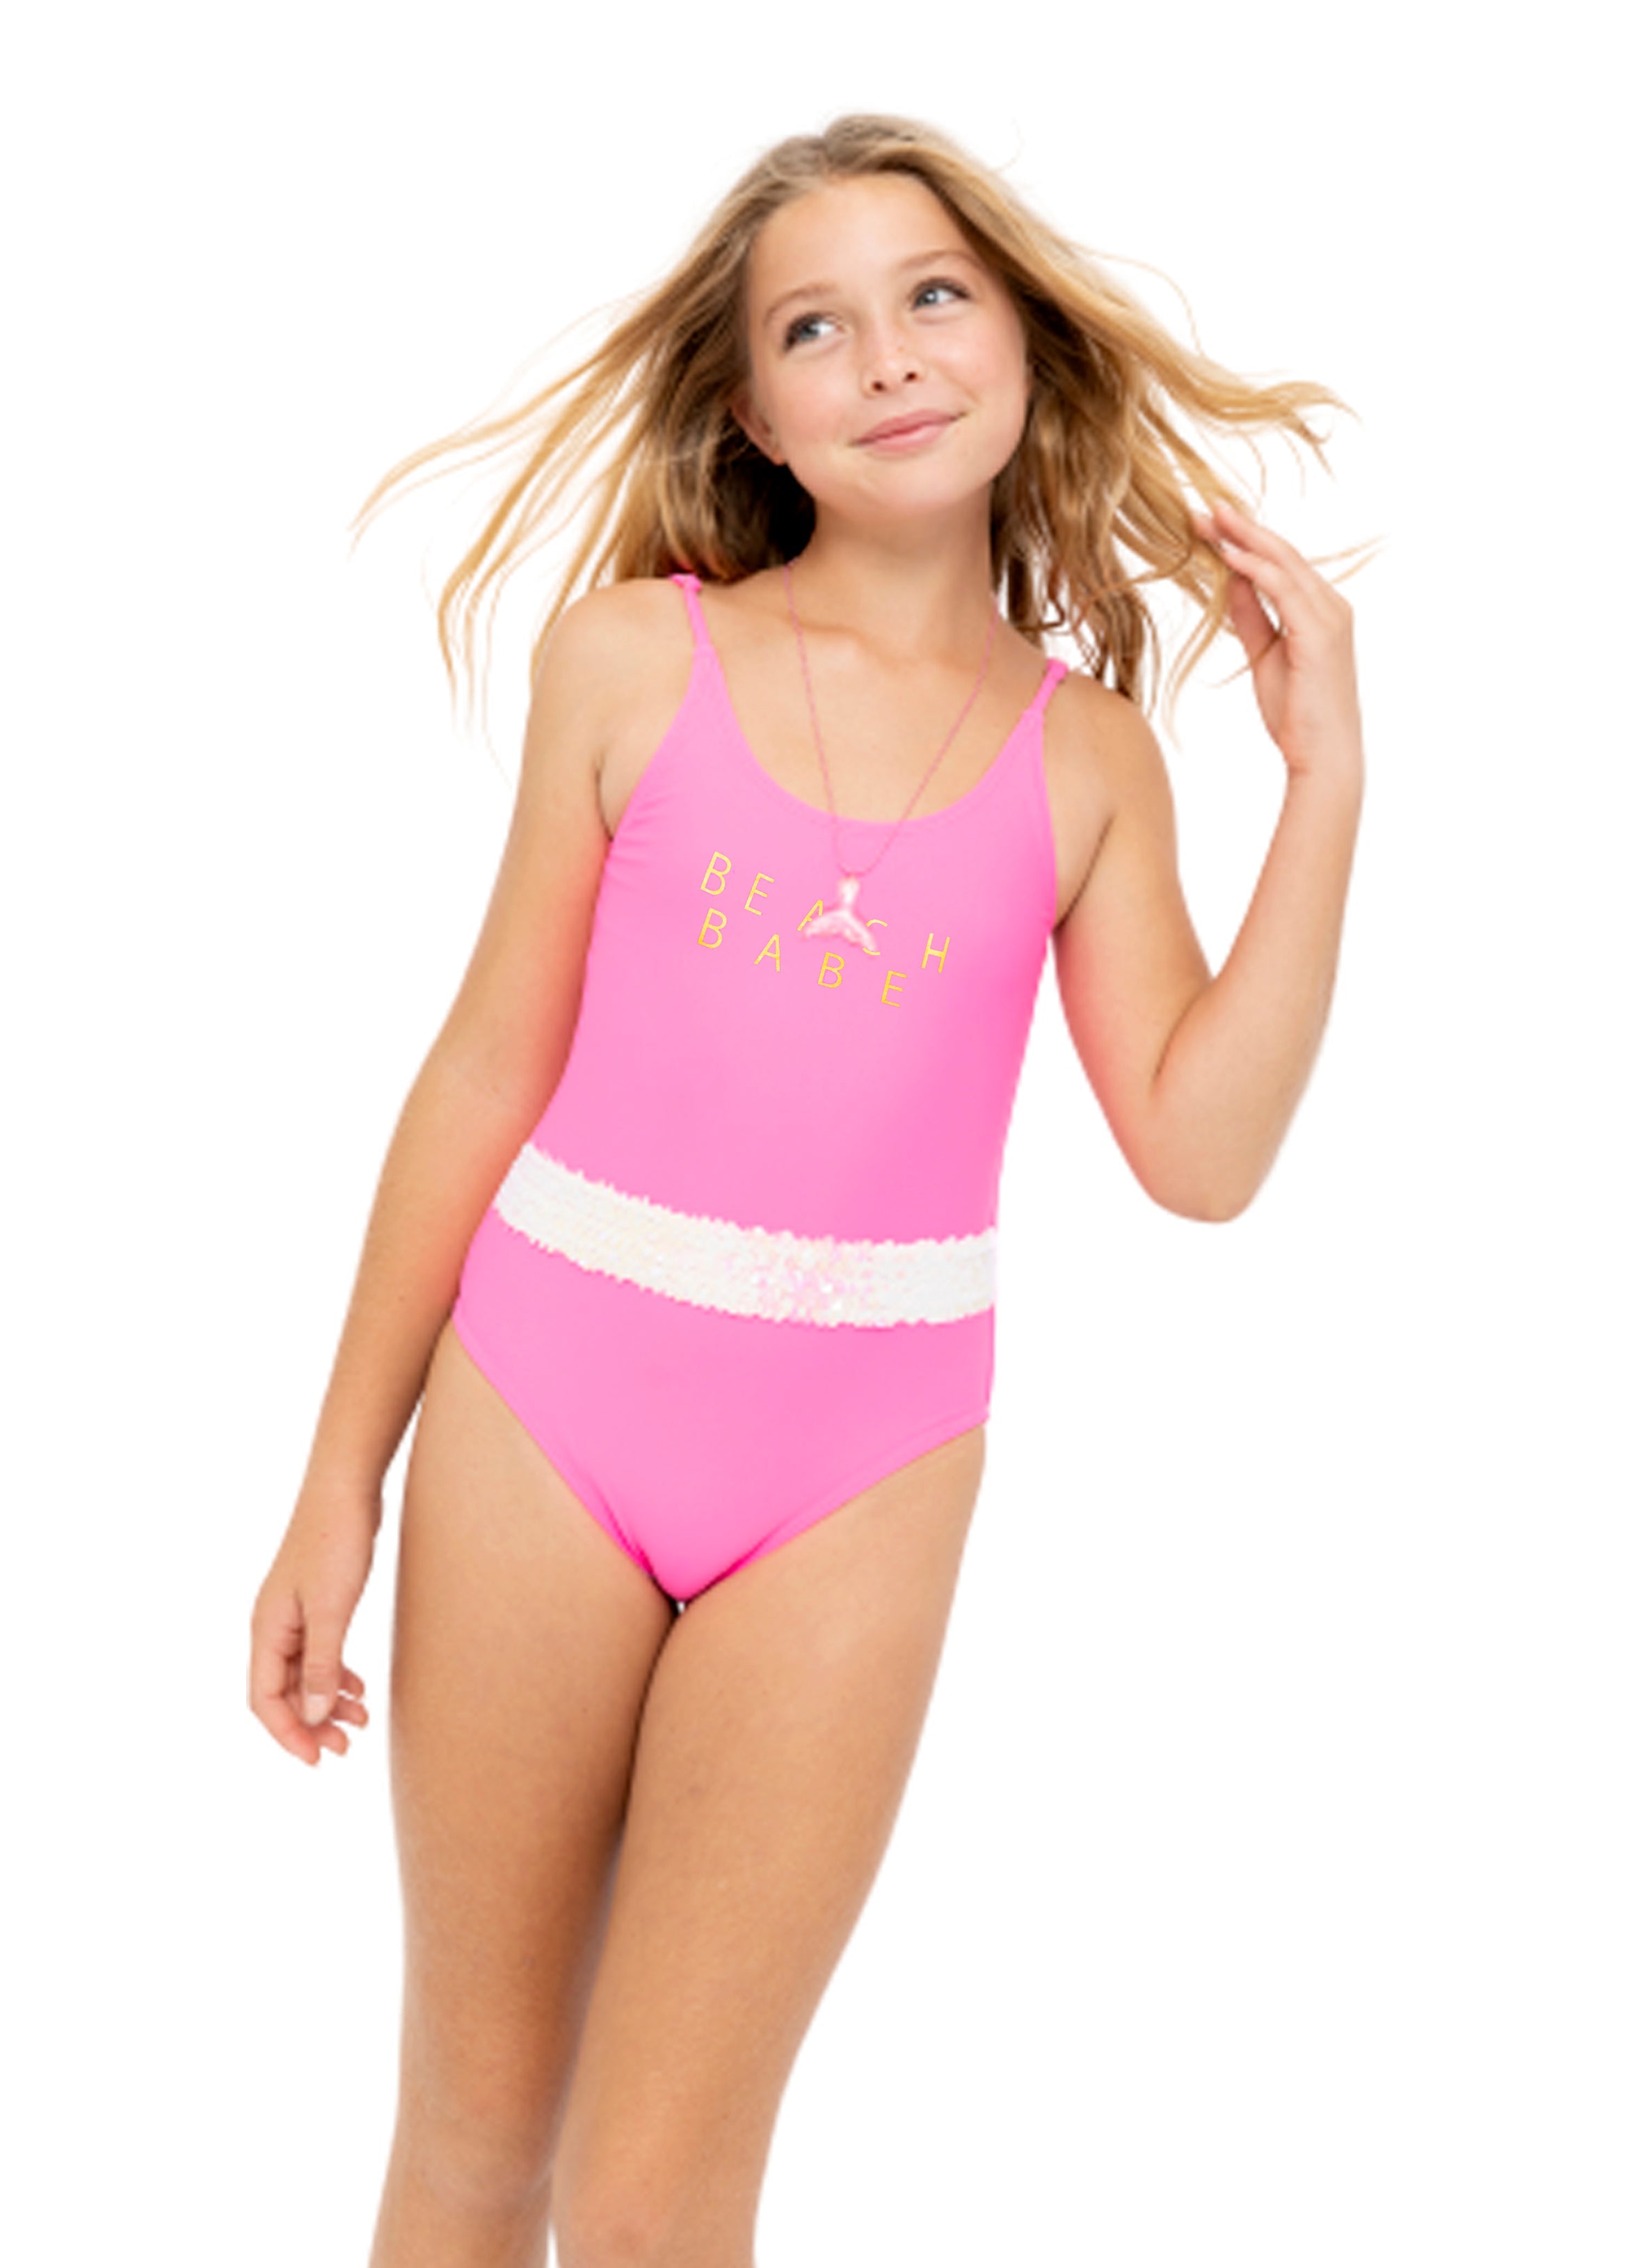 Beach Babe Neon Pink Swimsuit With Sequin Belt